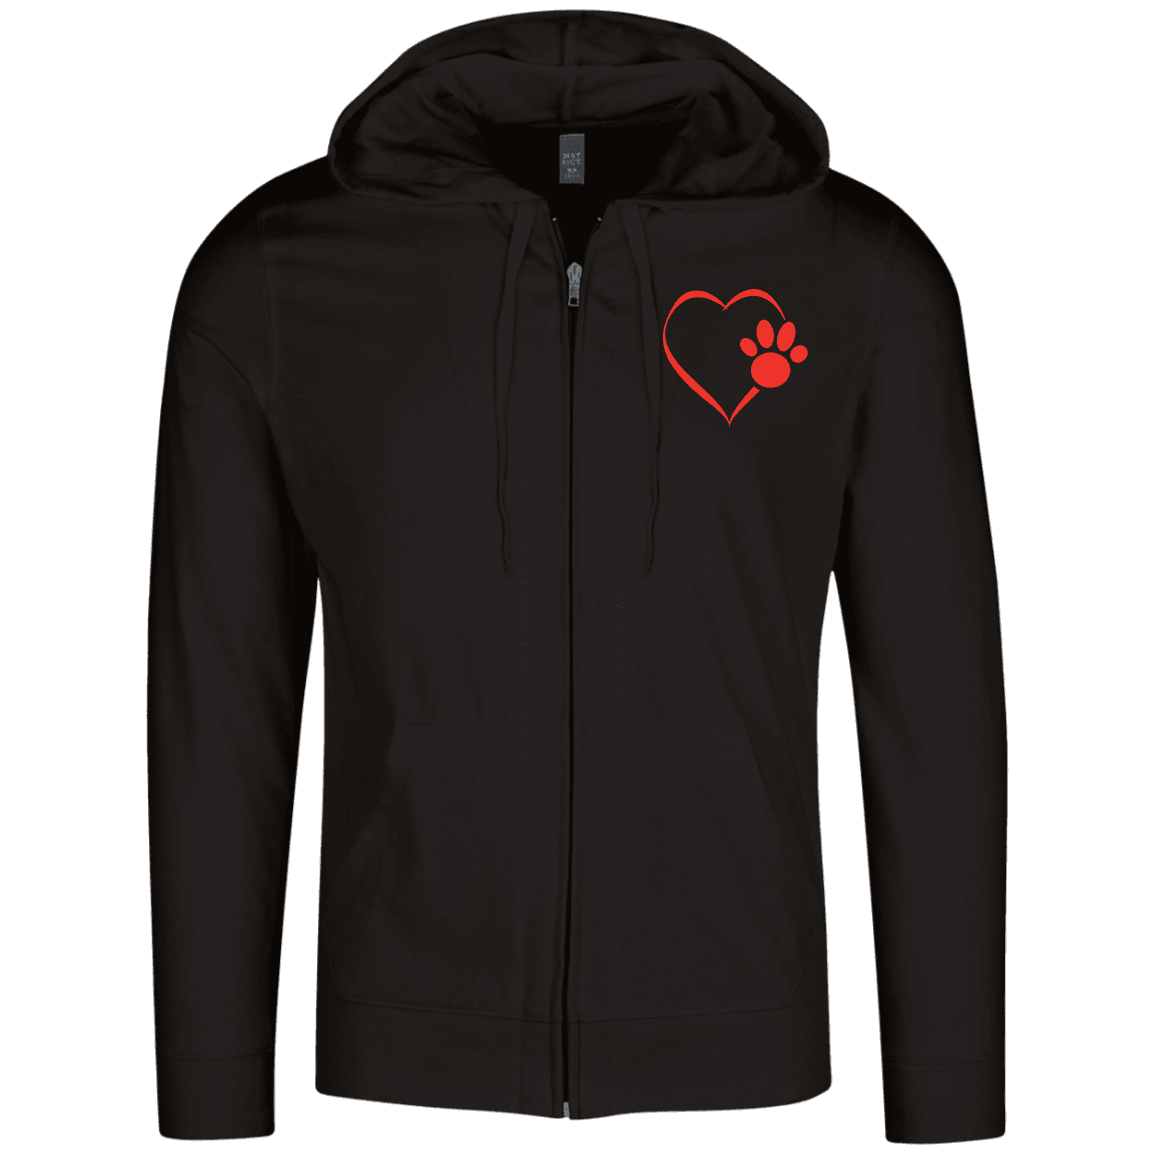 Designs by MyUtopia Shout Out:Heart Dog Paw Embroidered Lightweight Full Zip Hoodie,Black / X-Small,Sweatshirts